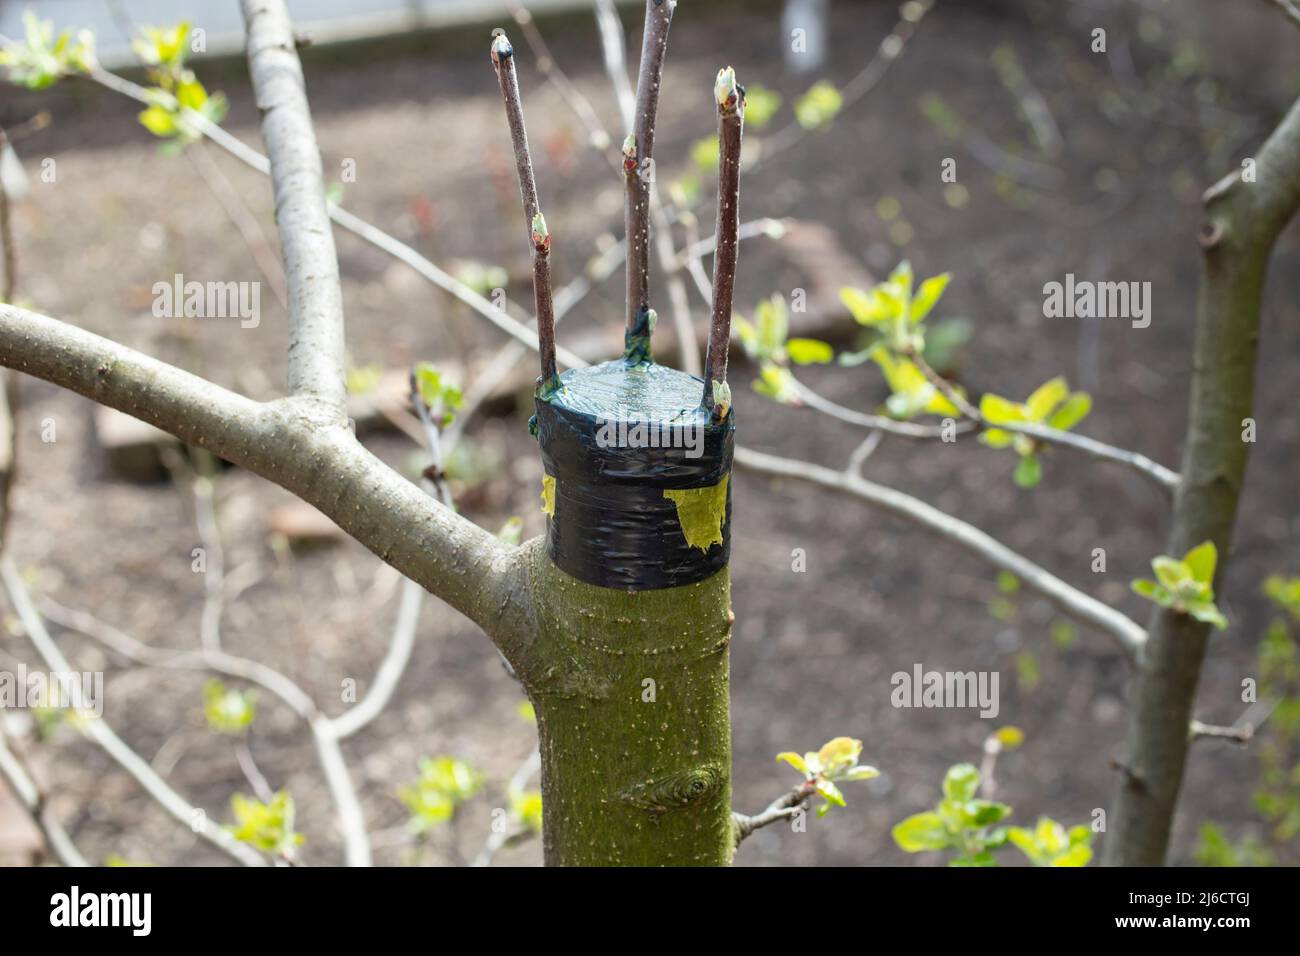 Grafting on a tree branch, close up Stock Photo